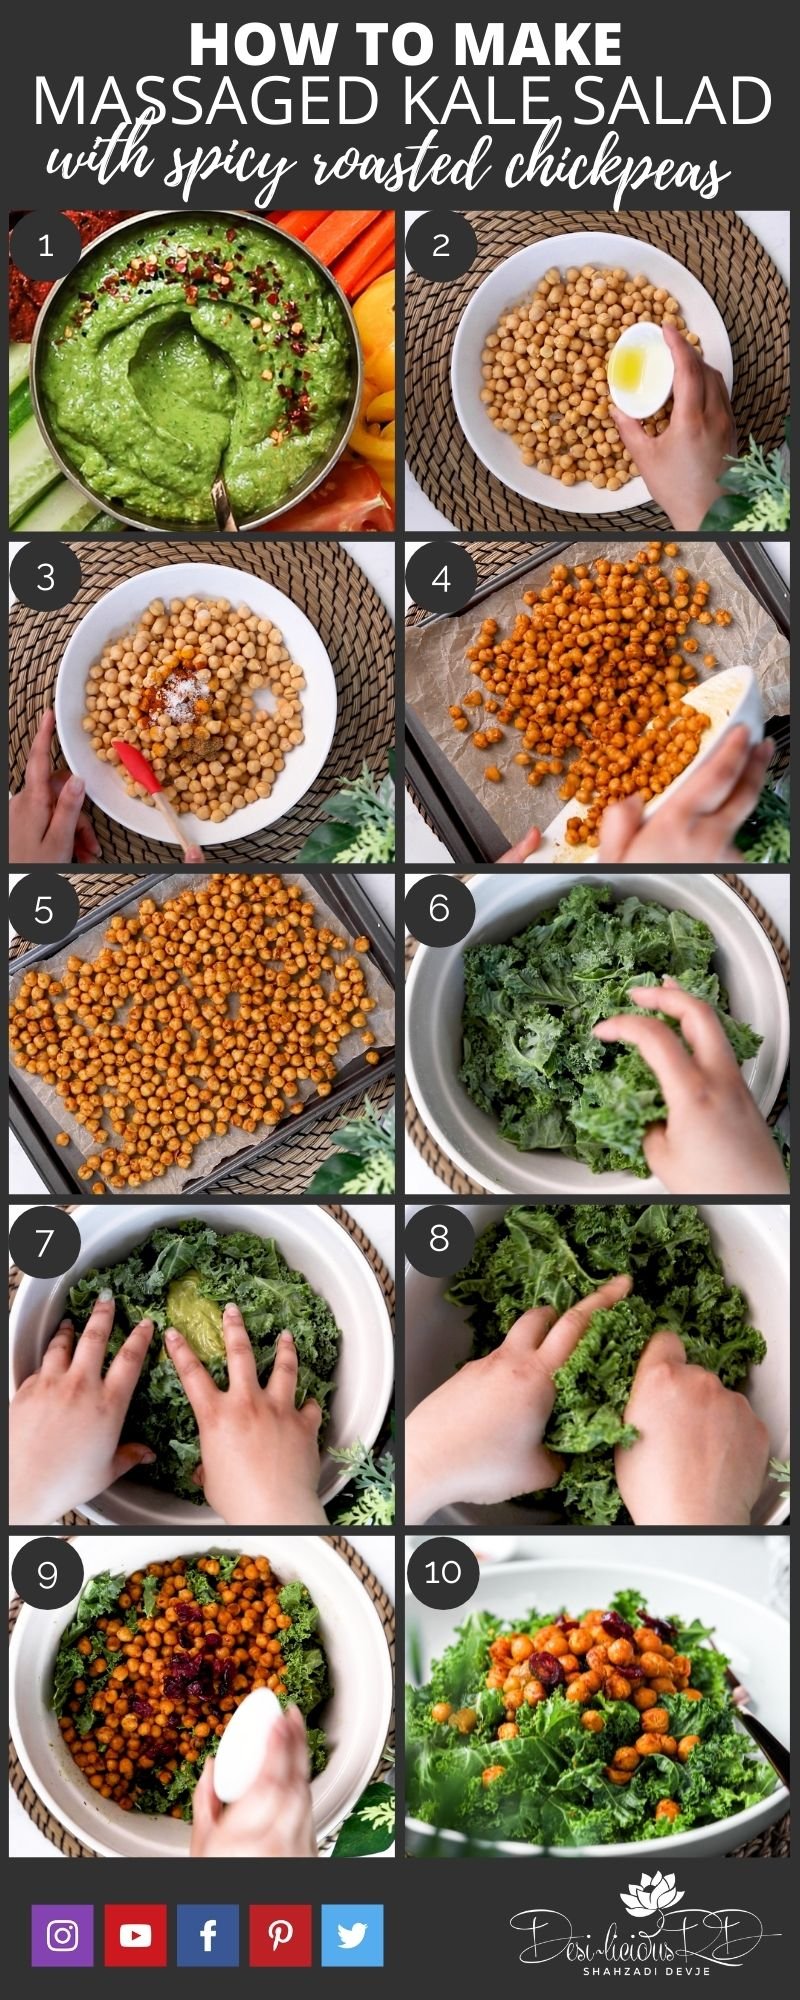 step by step preparation shots of how to make kale salad with spicy roasted chickpeas.